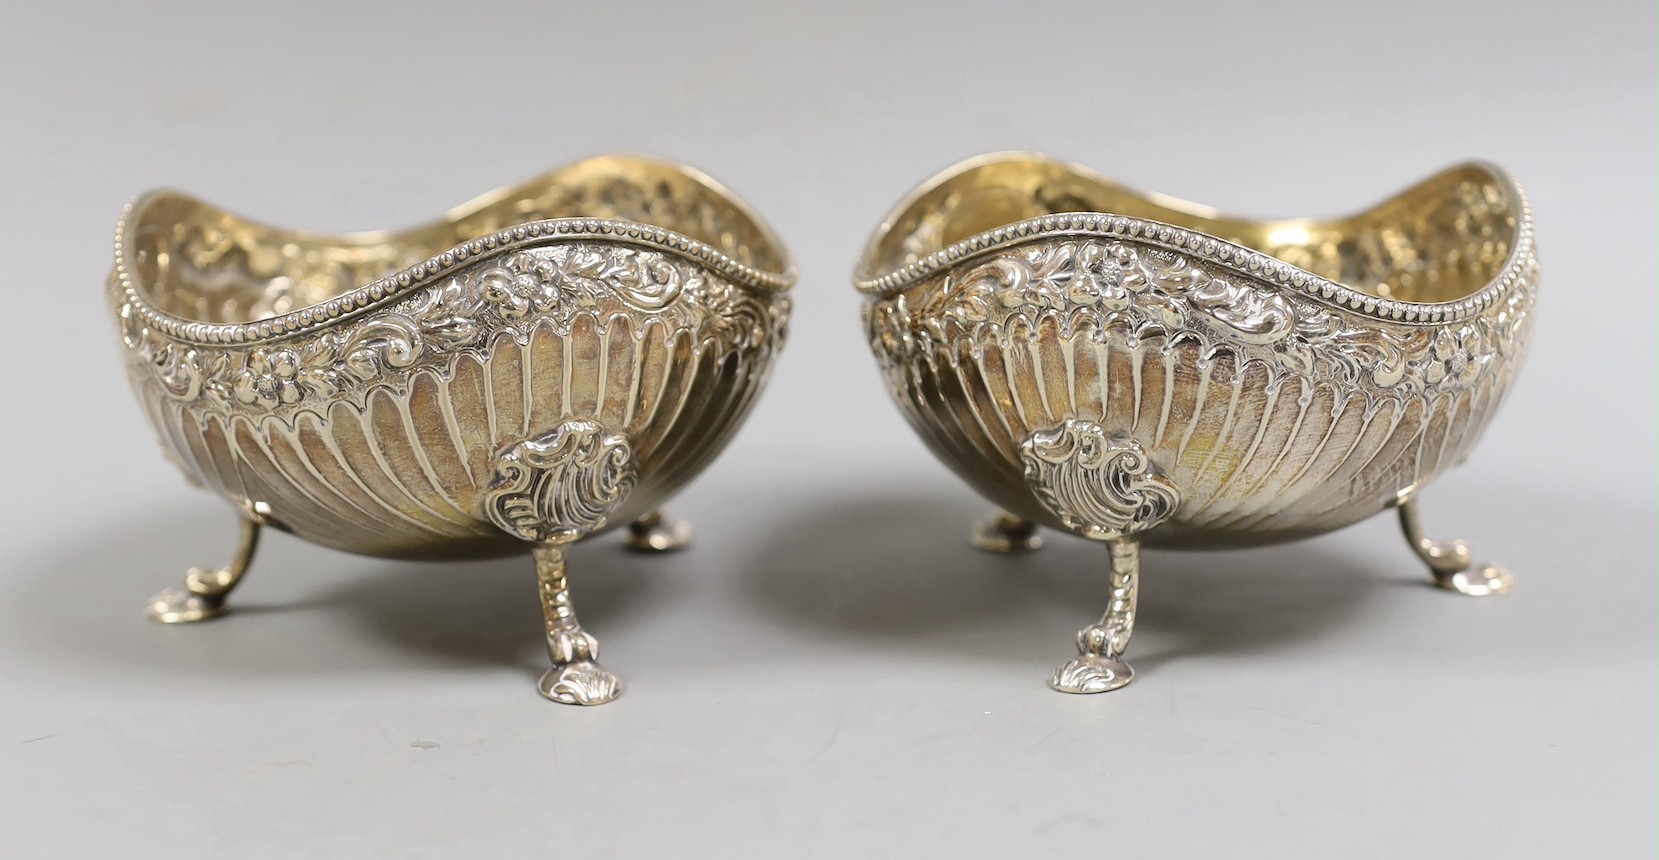 A pair of late Victorian fluted silver sweetmeat bowls, on tripod supports, Daniel & John Welby, London, 1885, diameter 10.7cm, 12.1oz.                                                                                     